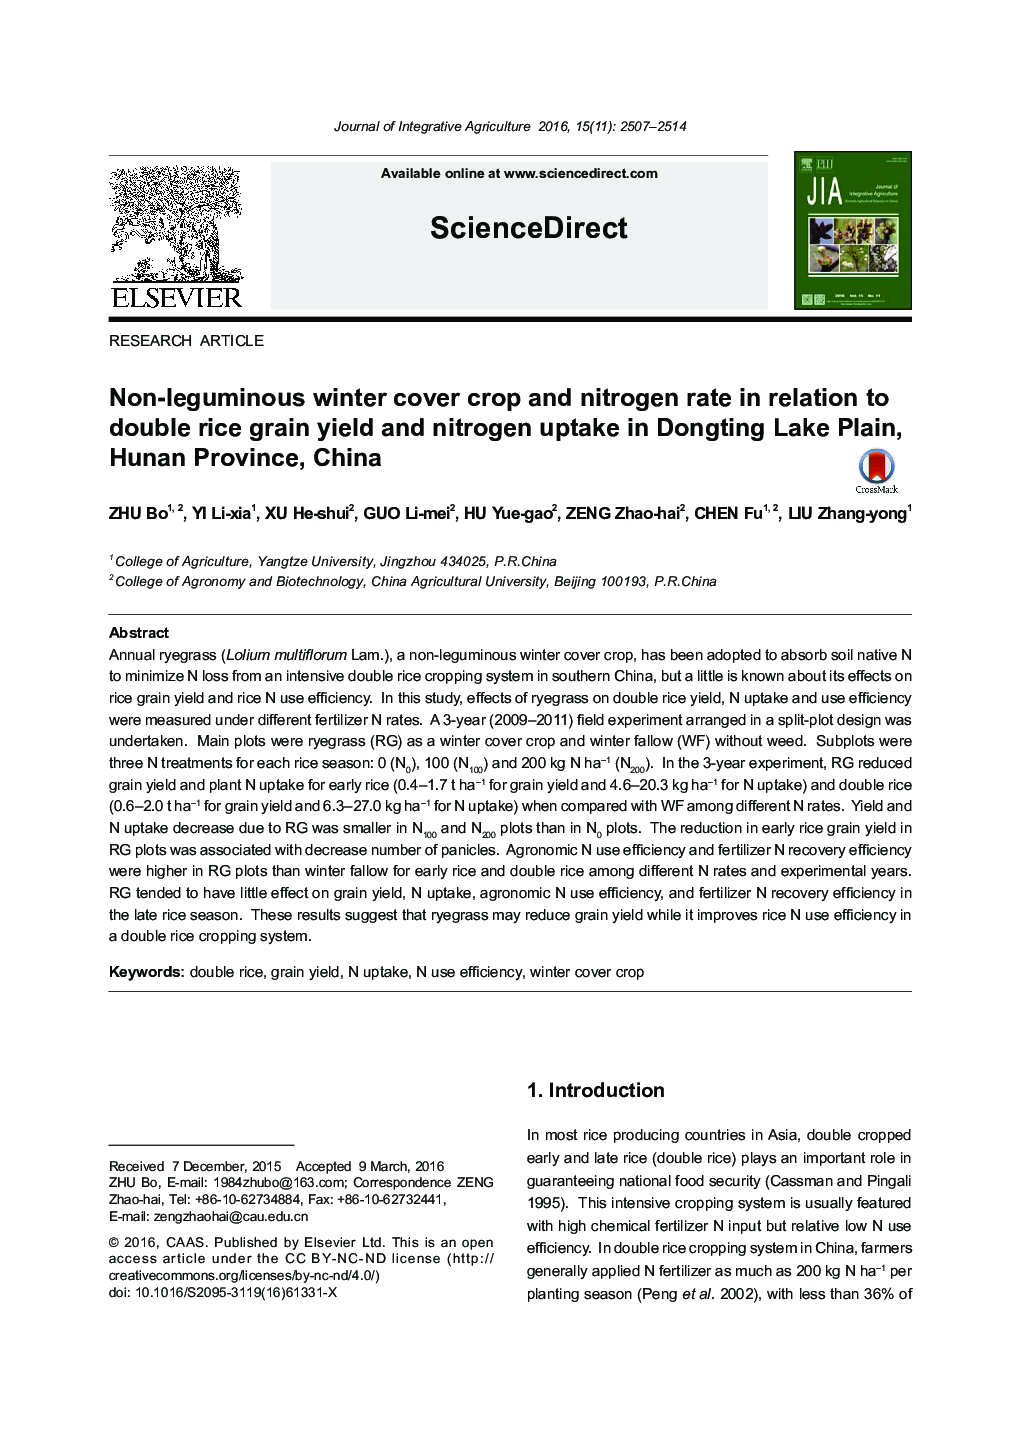 Non-leguminous winter cover crop and nitrogen rate in relation to double rice grain yield and nitrogen uptake in Dongting Lake Plain, Hunan Province, China